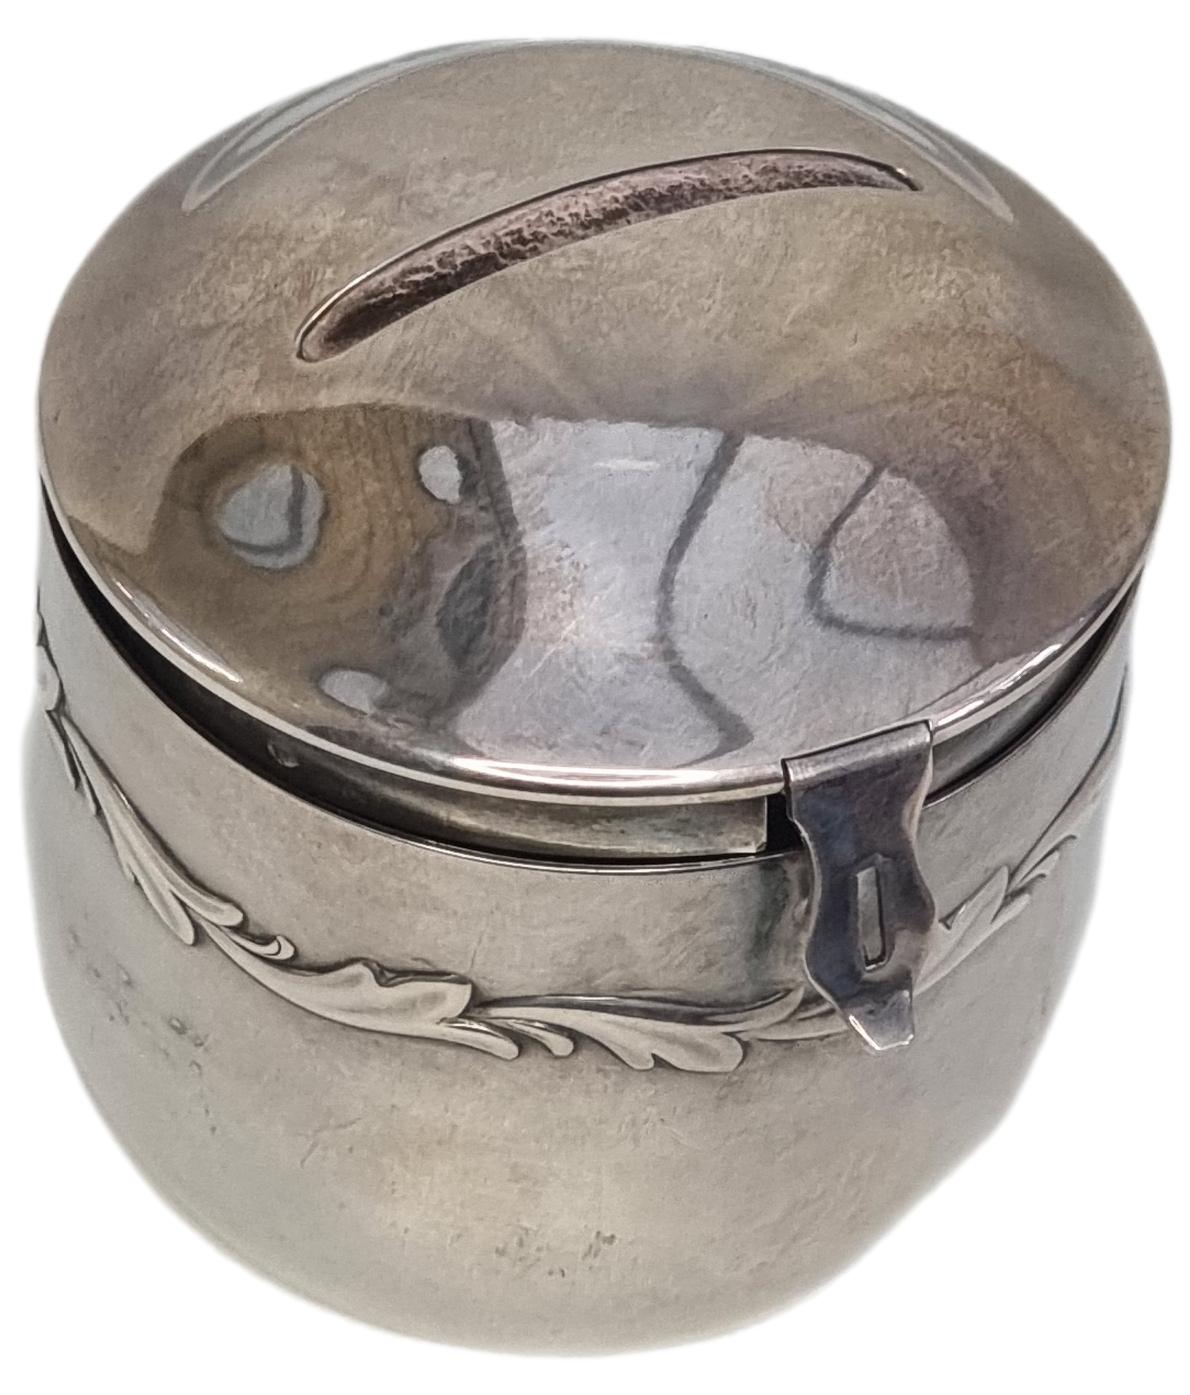 A delightful WMF money box circa 1910 in silverplate with a slot on top for inserting coins. The barrel shaped body has a decorative leaf pattern around its entirety. Main and only photo of the WMF barrel money box seen at a slight raised angle with coin slot visible at top